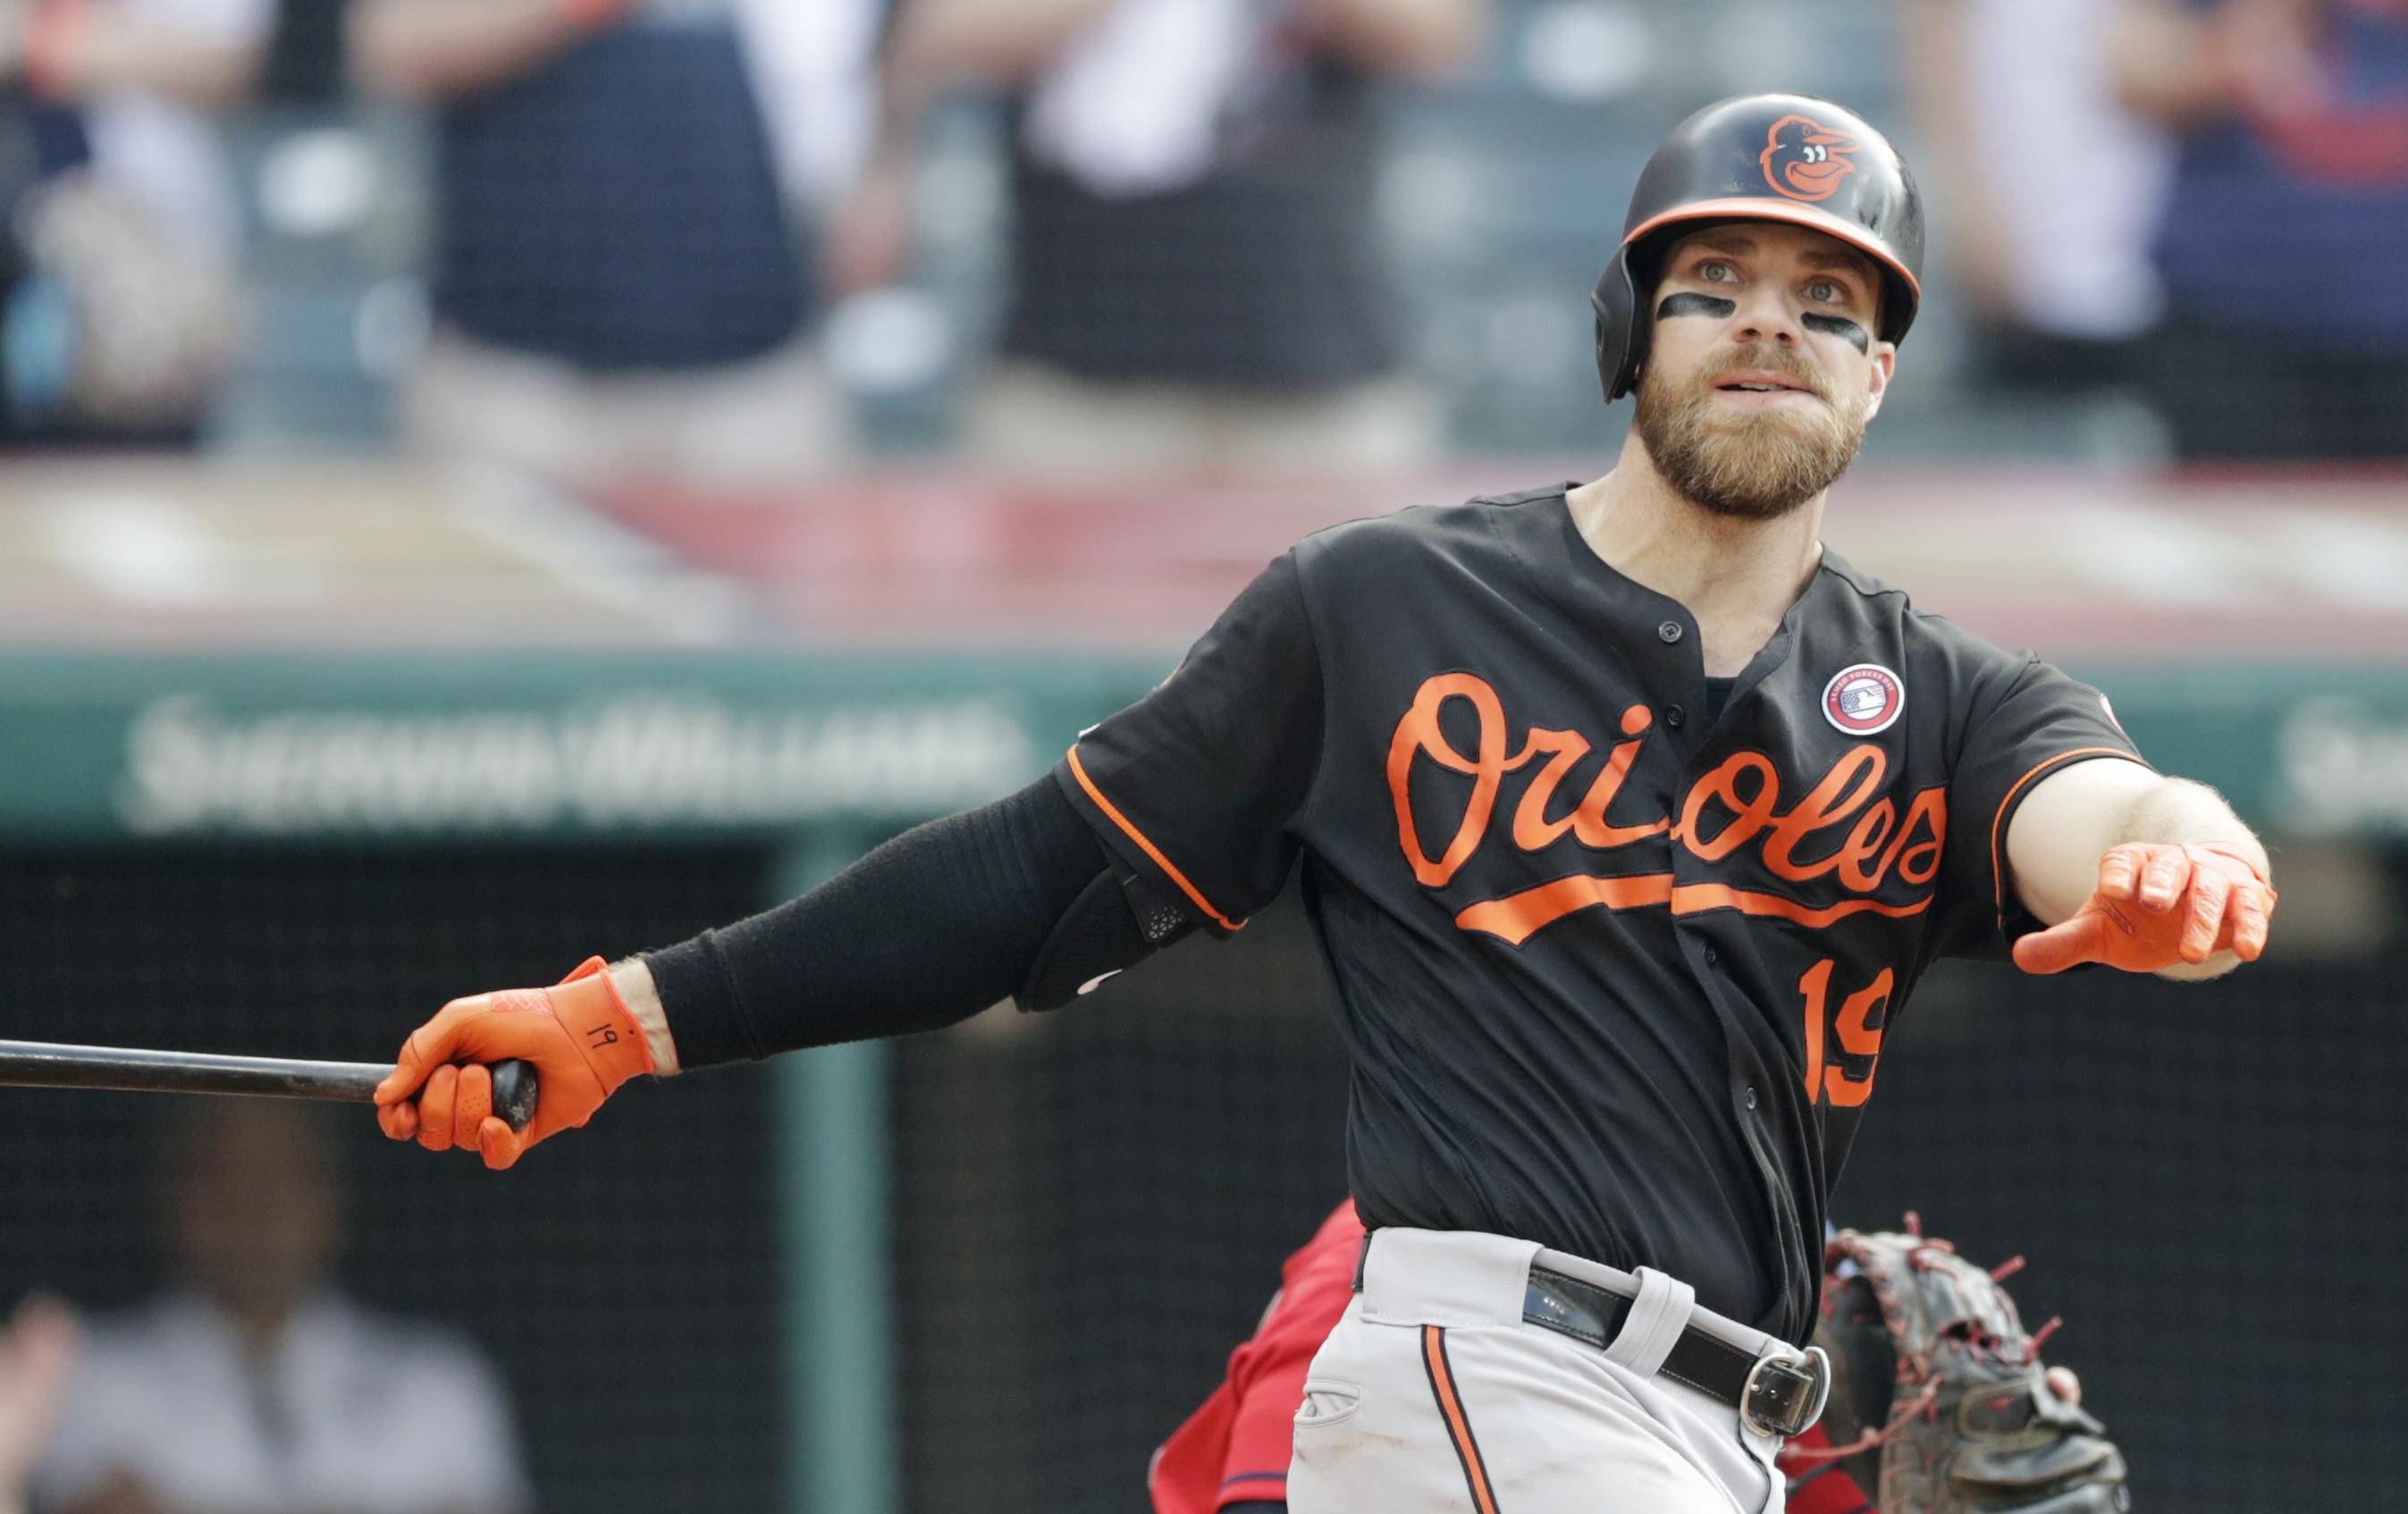 Friday Newsletter time: Ex-Ranger Chris Davis retires with most ignoring  the success he had